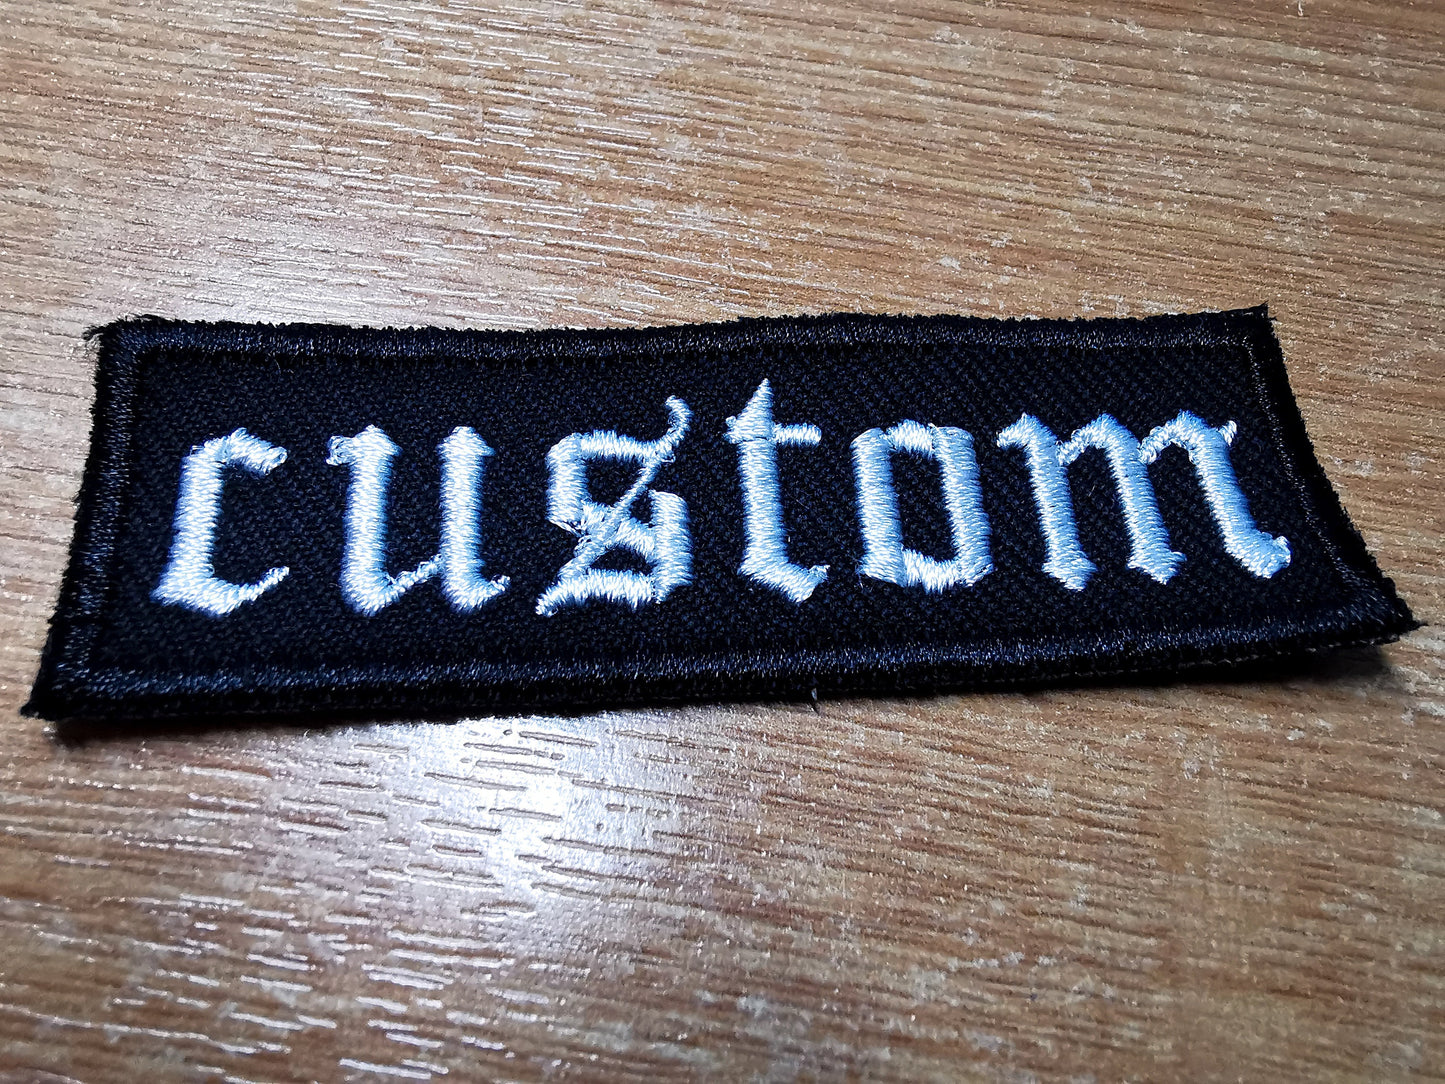 Custom Embroidered Patch Old English Black Metal Punk LA Tattoo Writing Style